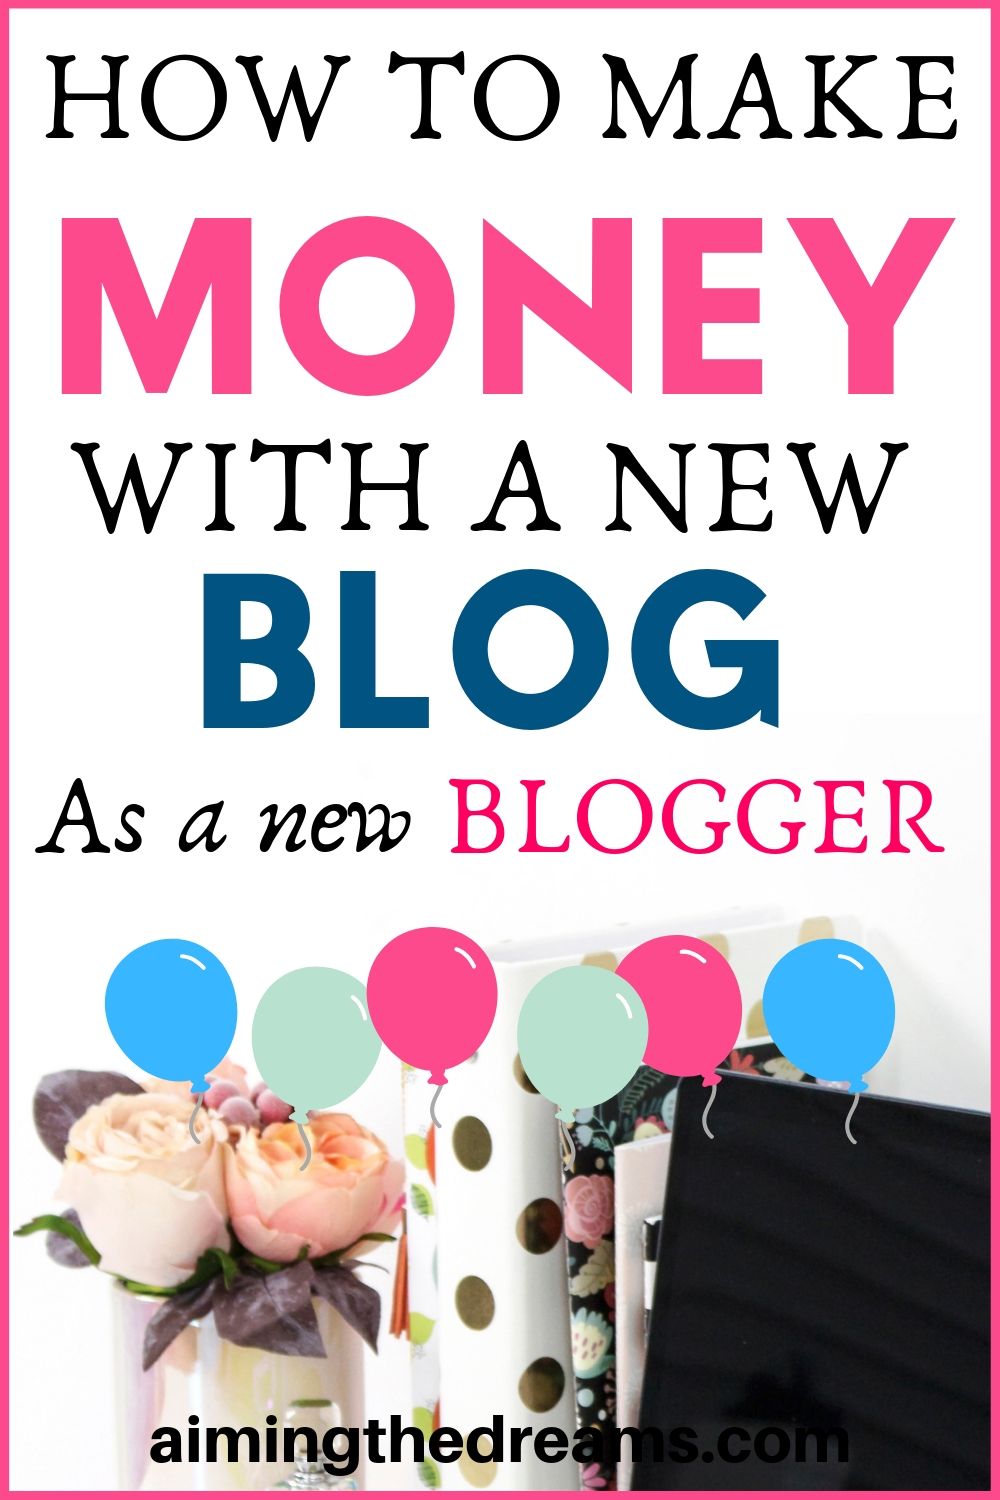 How to make money with a new blog as a beginner blogger